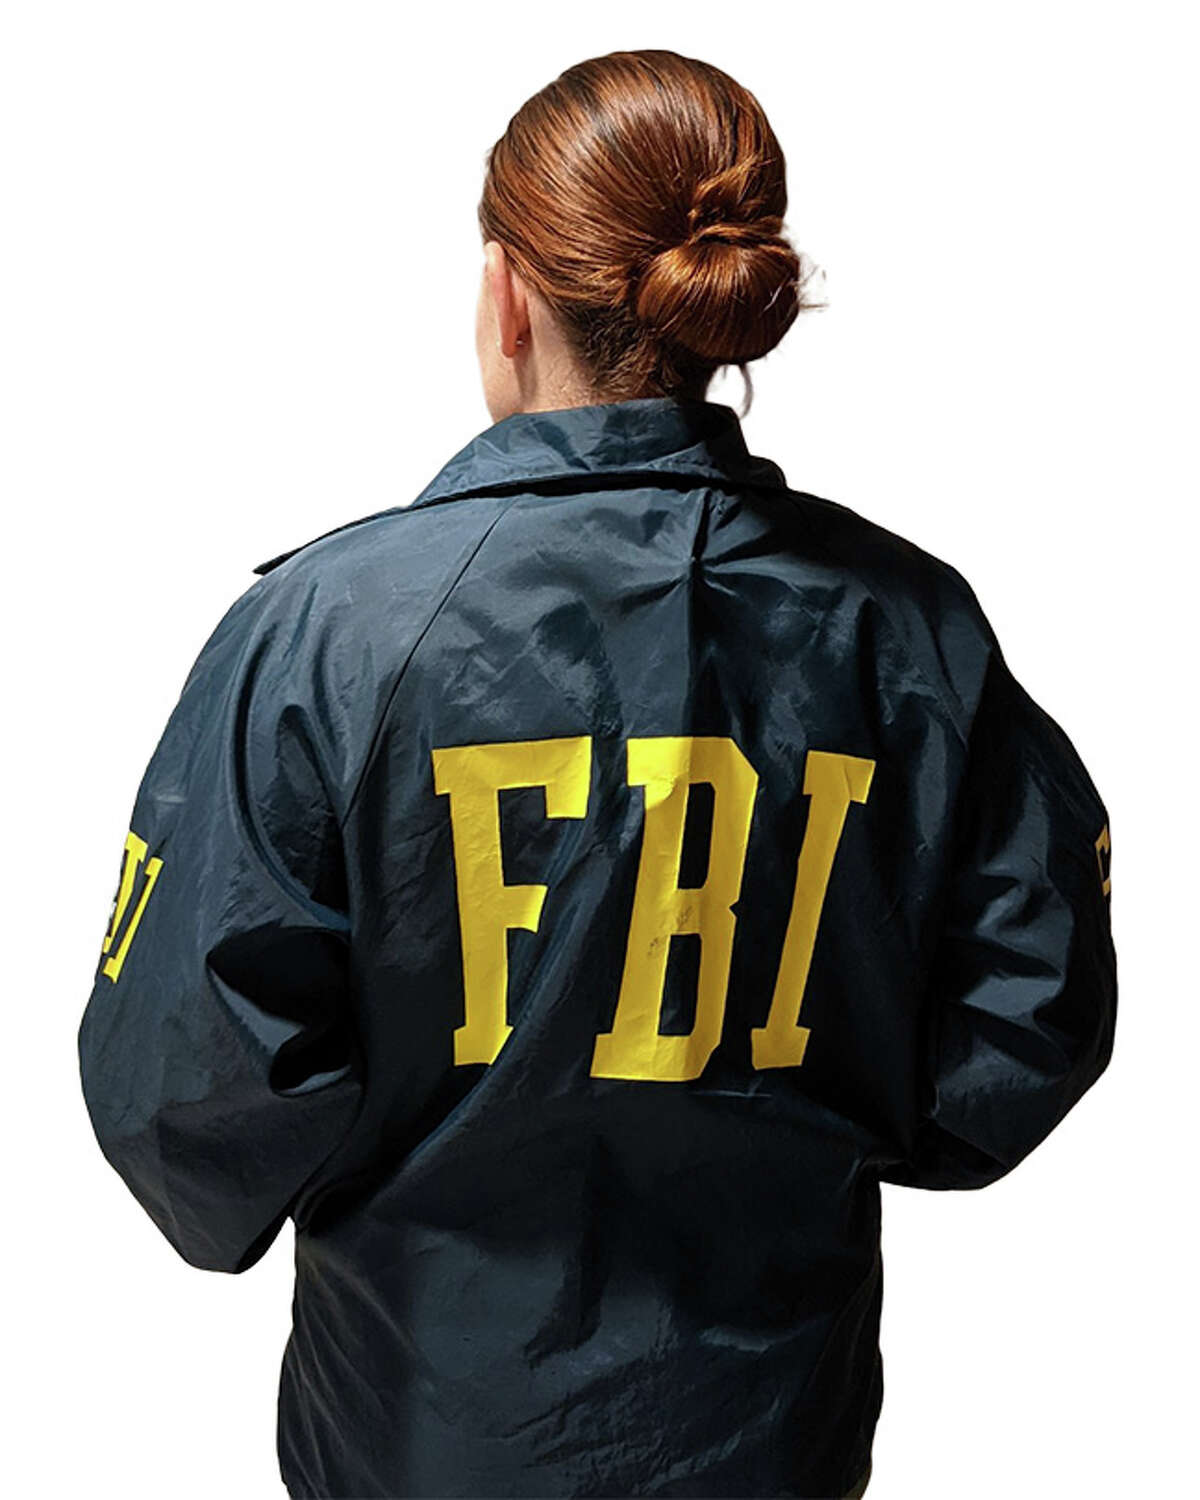 Erika is a special agent for the Springfield division of the Federal Bureau of Investigation. She works in the Violent Crimes Against Children program.